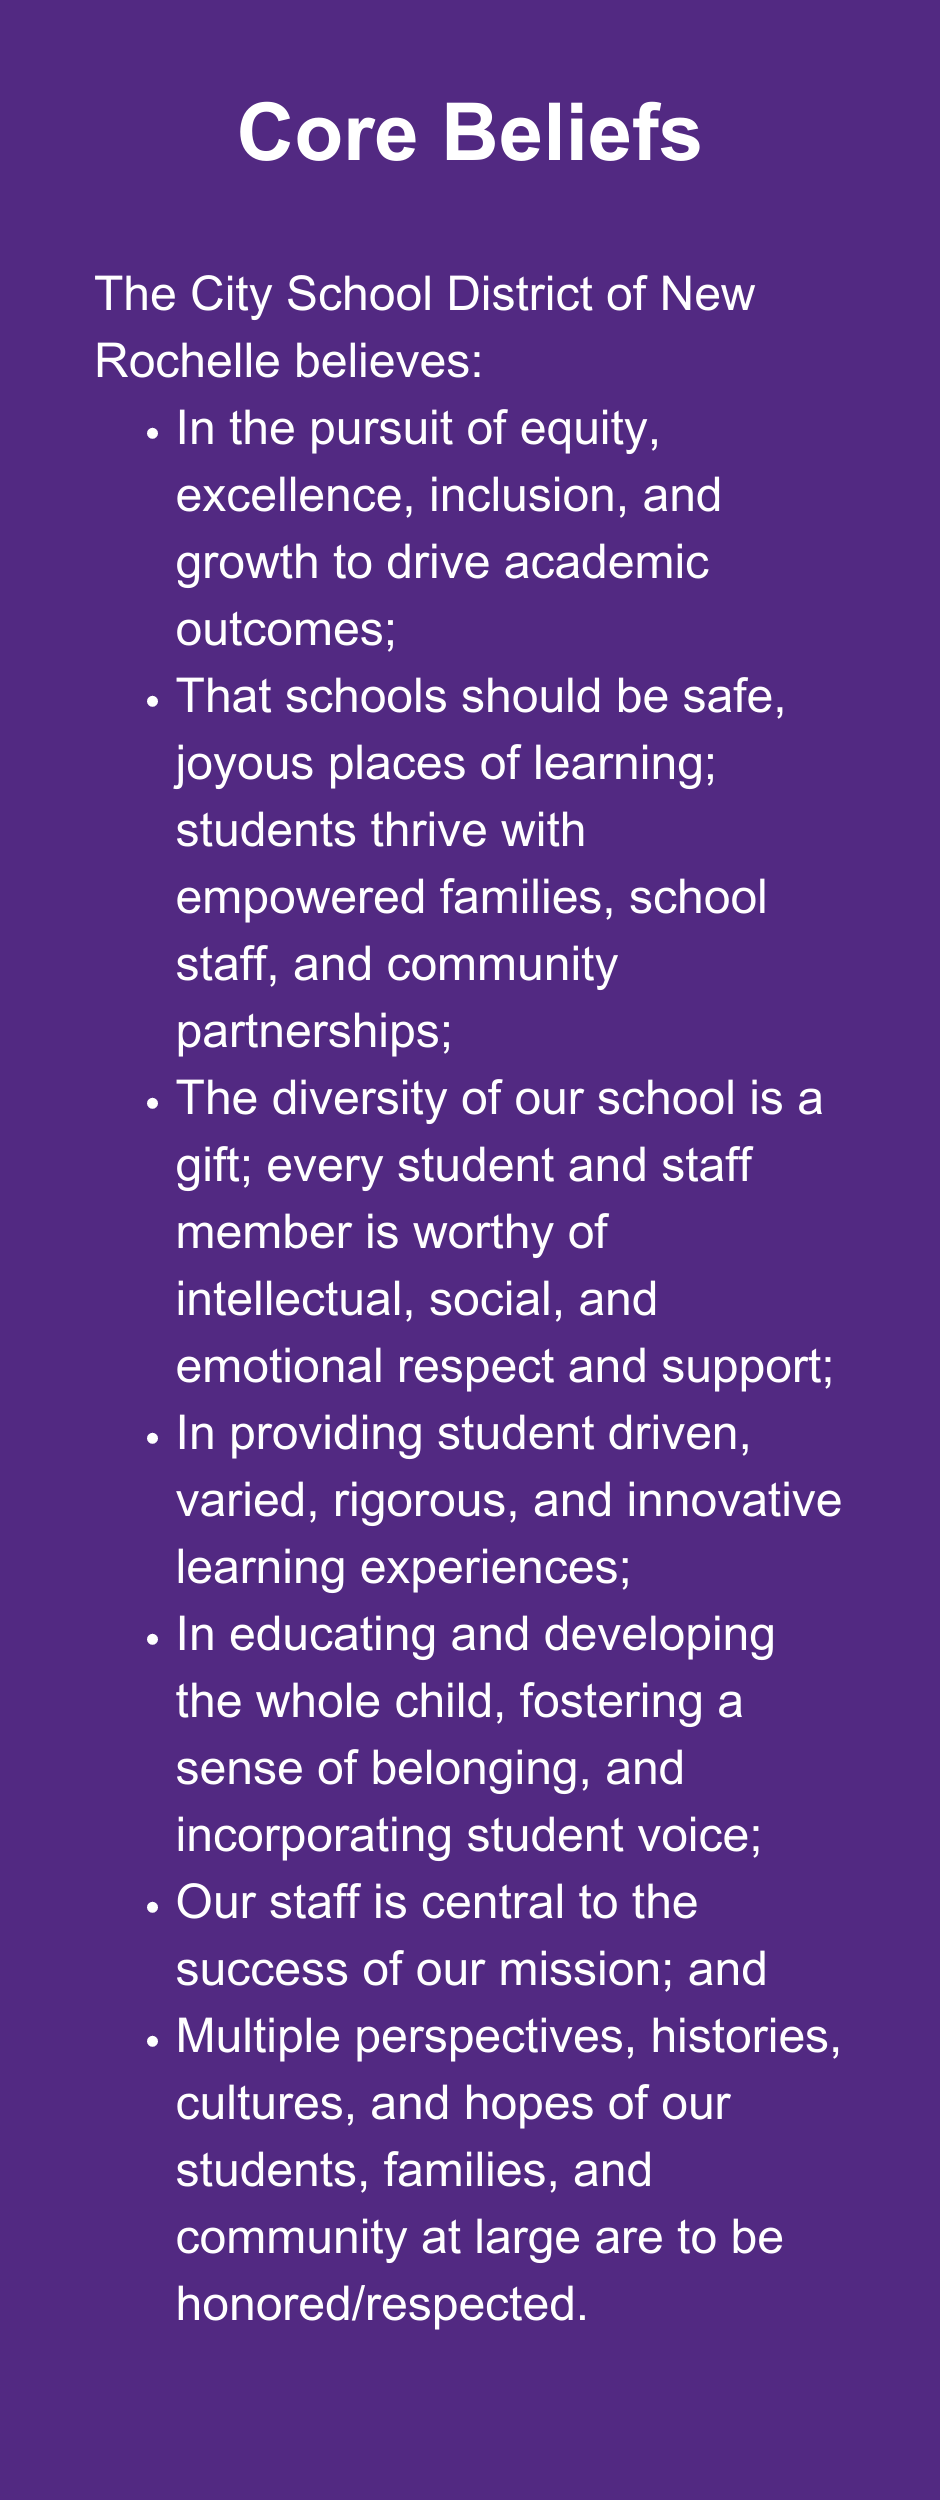 Core Beliefs: The City School District of New Rochelle believes: In the pursuit of equity, excellence, inclusion, and growth to drive academic outcomes; That schools should be safe, joyous places of learning; students thrive with empowered families, school staff, and community partnerships; The diversity of out school is a gift; every student and staff member is worth of intellectual, social, and emotional respect and support; In providing student driven, varied, rigorous, and innovative learning experiences; In educating and developing the whole child, fostering a sense of belonging, and incorporating student voice; Our staff is central to the success of out mission; and Multiple perspectives, histories, cultures, and hopes of our students, families, and community at large are to be honored/respected.